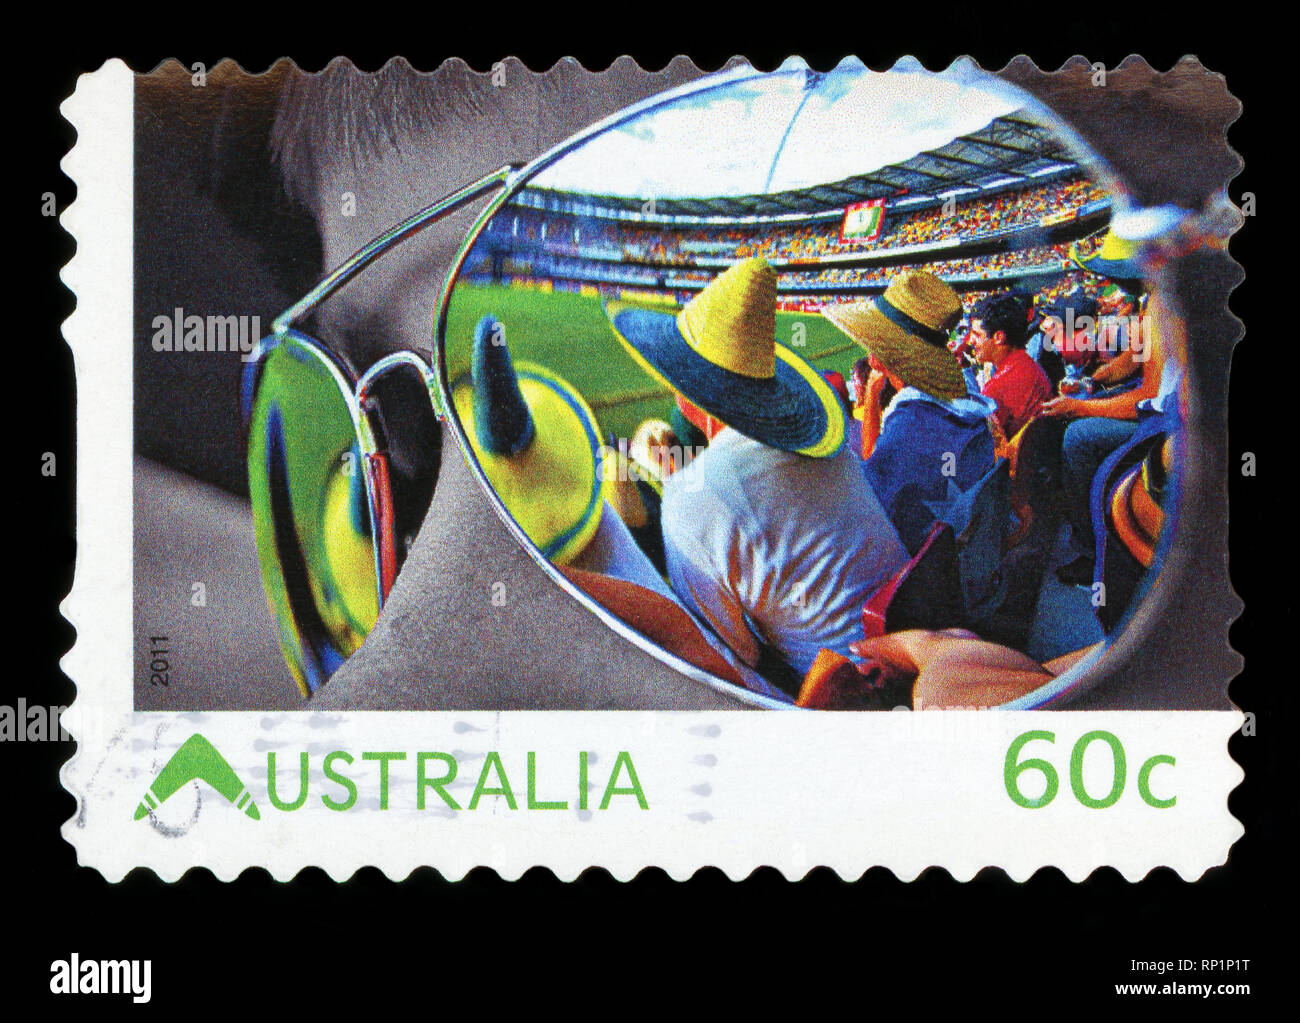 AUSTRALIA - CIRCA 2011: a stamp printed in the Australia shows the Rugby match from supporter side,  circa 2011. Stock Photo